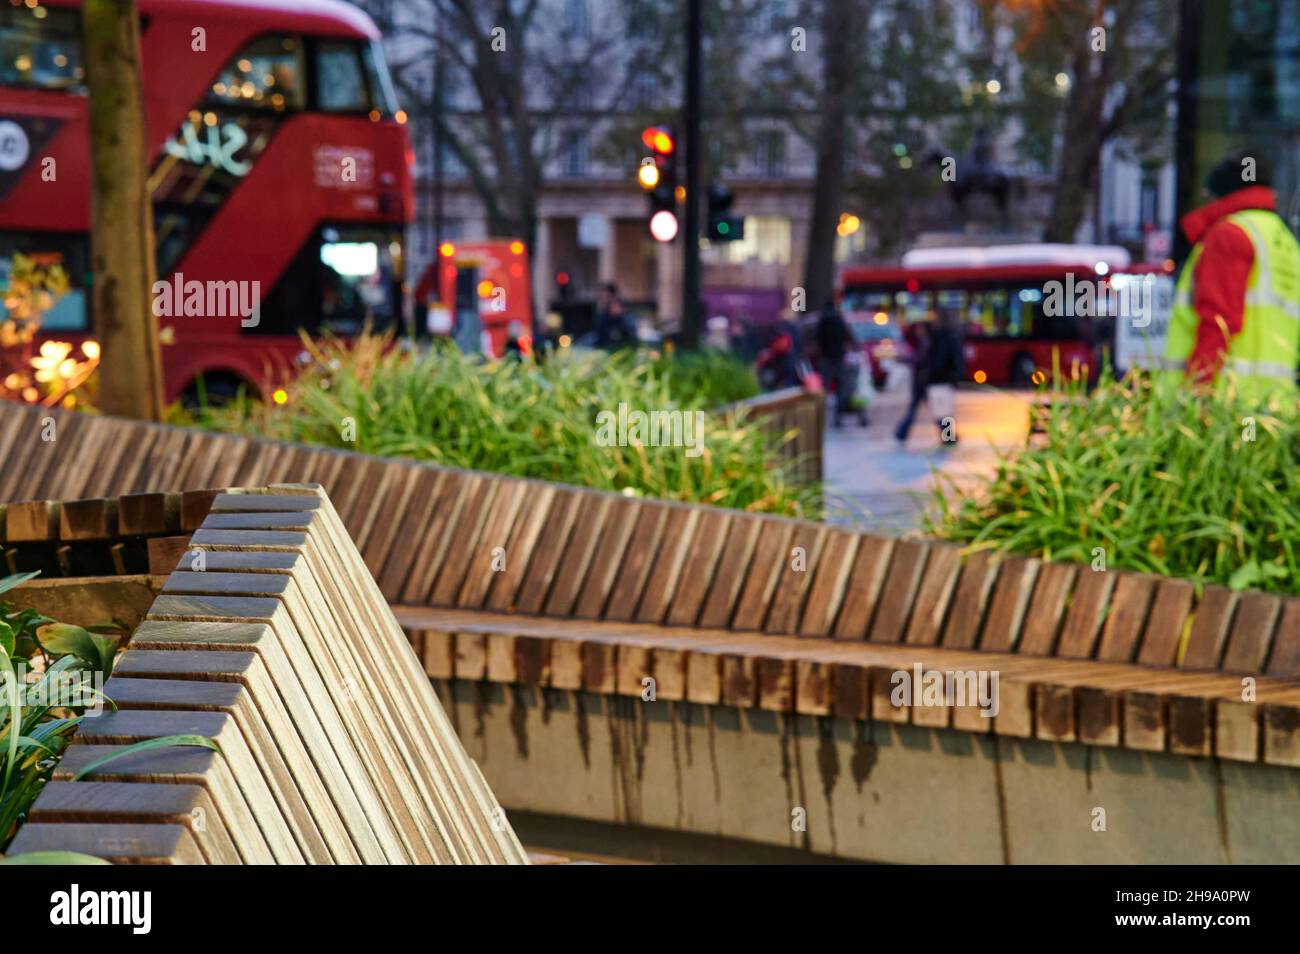 London twilight street scene with blurred background with london bus,pedestrians , plants and wooden seats. no brands visible. Stock Photo